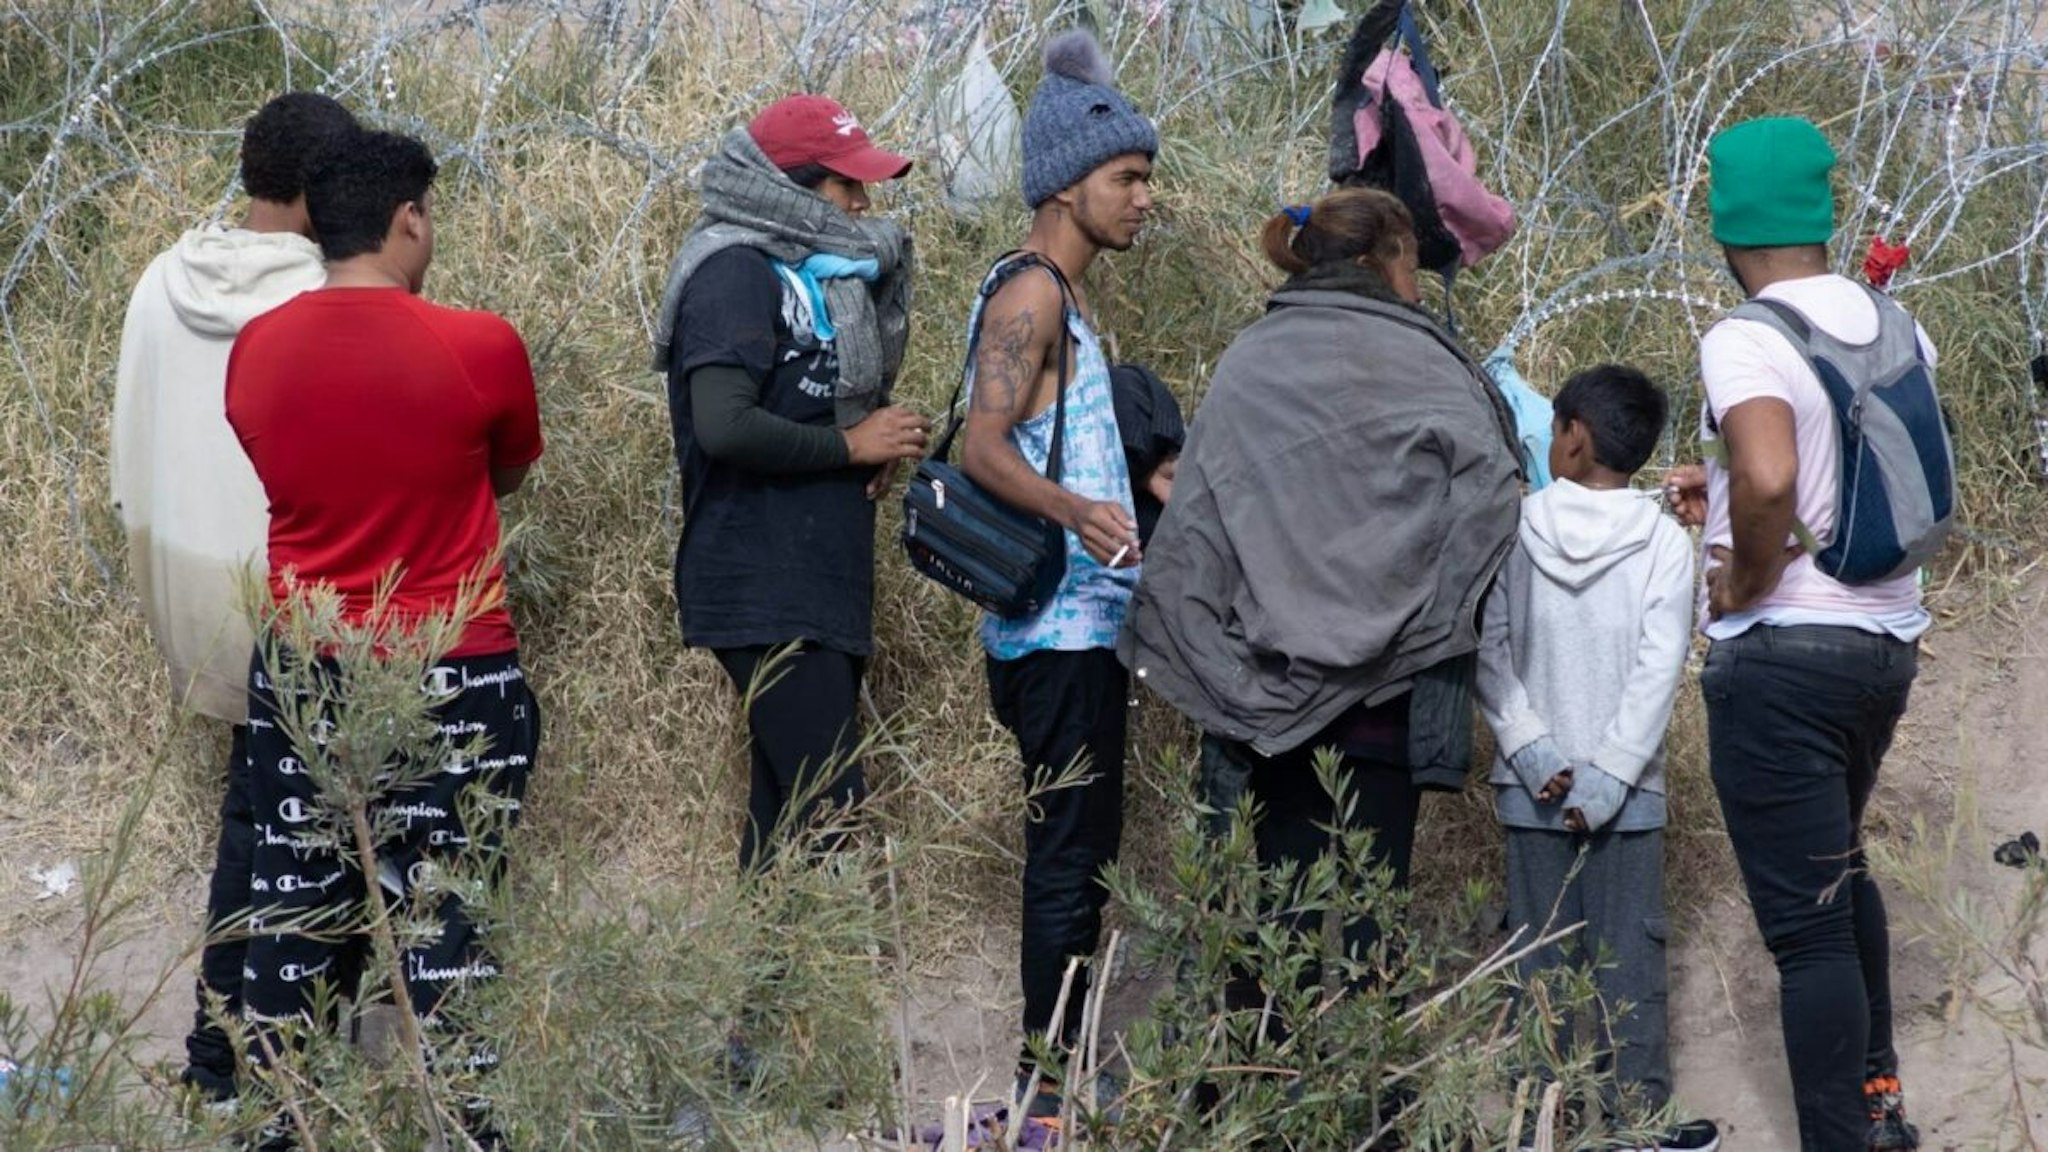 Hundreds of migrants are continuing to cross the Rio Grande, the border between Mexico and the United States, in hopes of spending Christmas on American soil, in City, Country, on December 23, 2023.